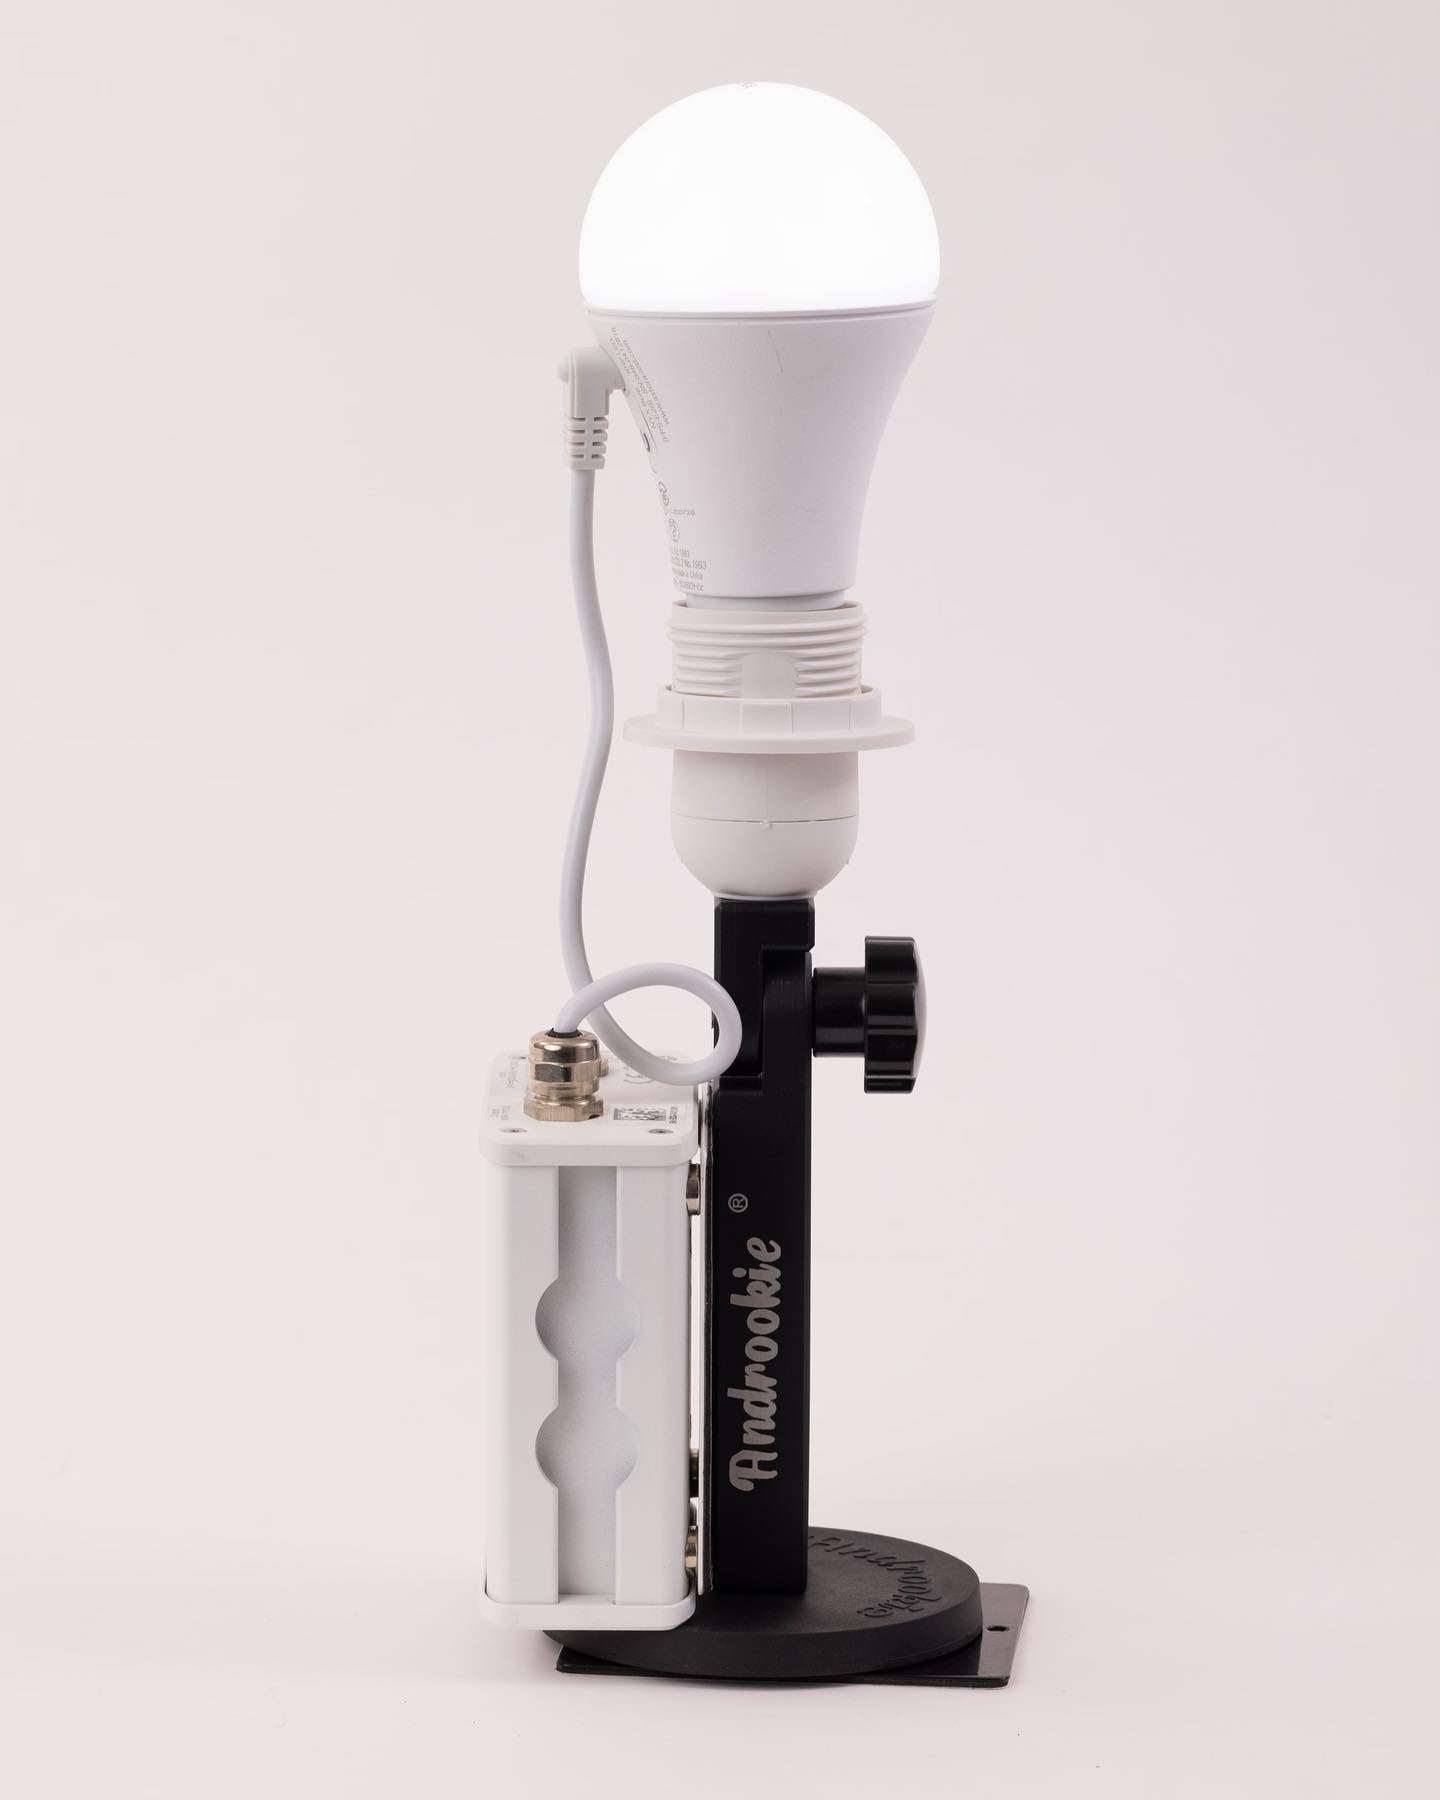 LED BULB FULL KIT by Androokie